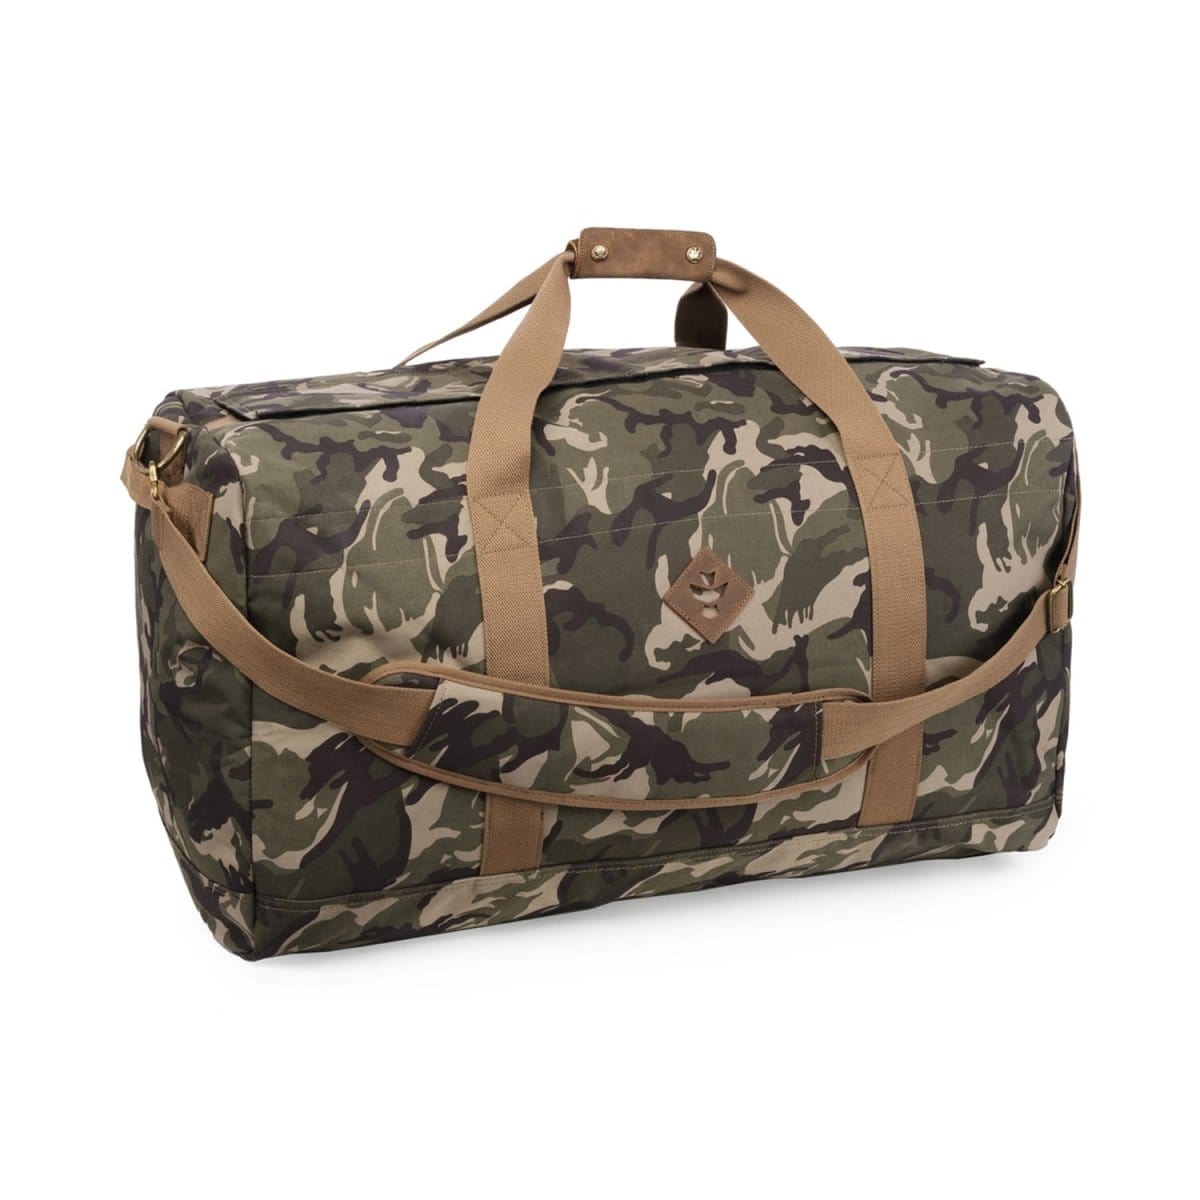 Revelry Supply Travel Bag Camo Brown The Continental - Smell Proof Large Duffle